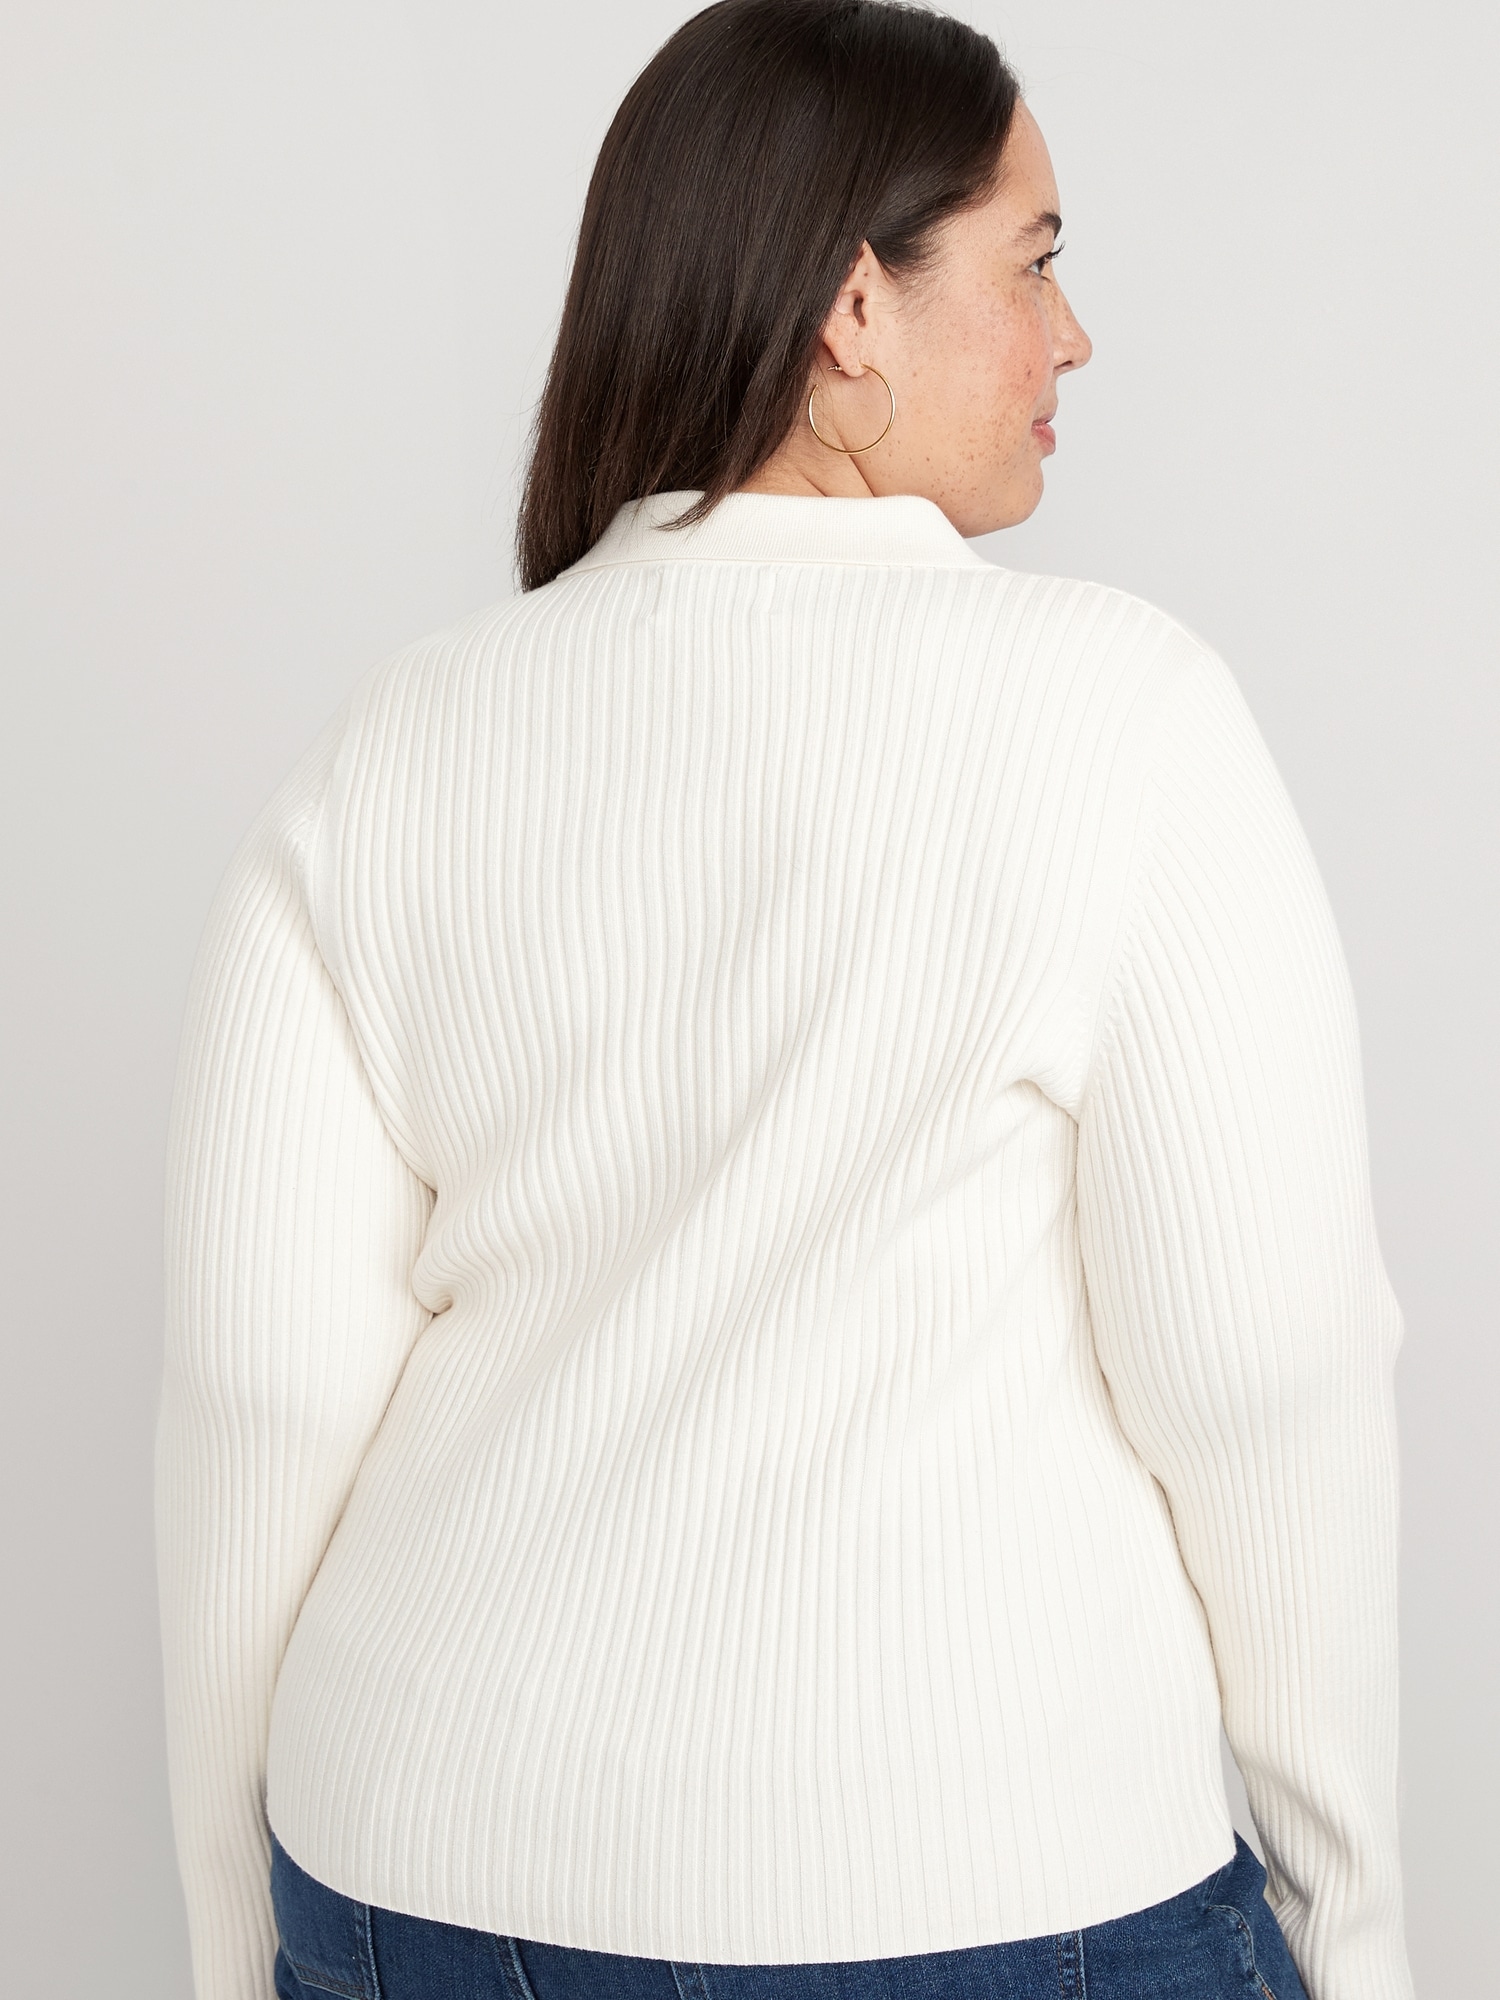 In The Thick Of It Rib-Knit Pullover Sweater in Tan, Black, White